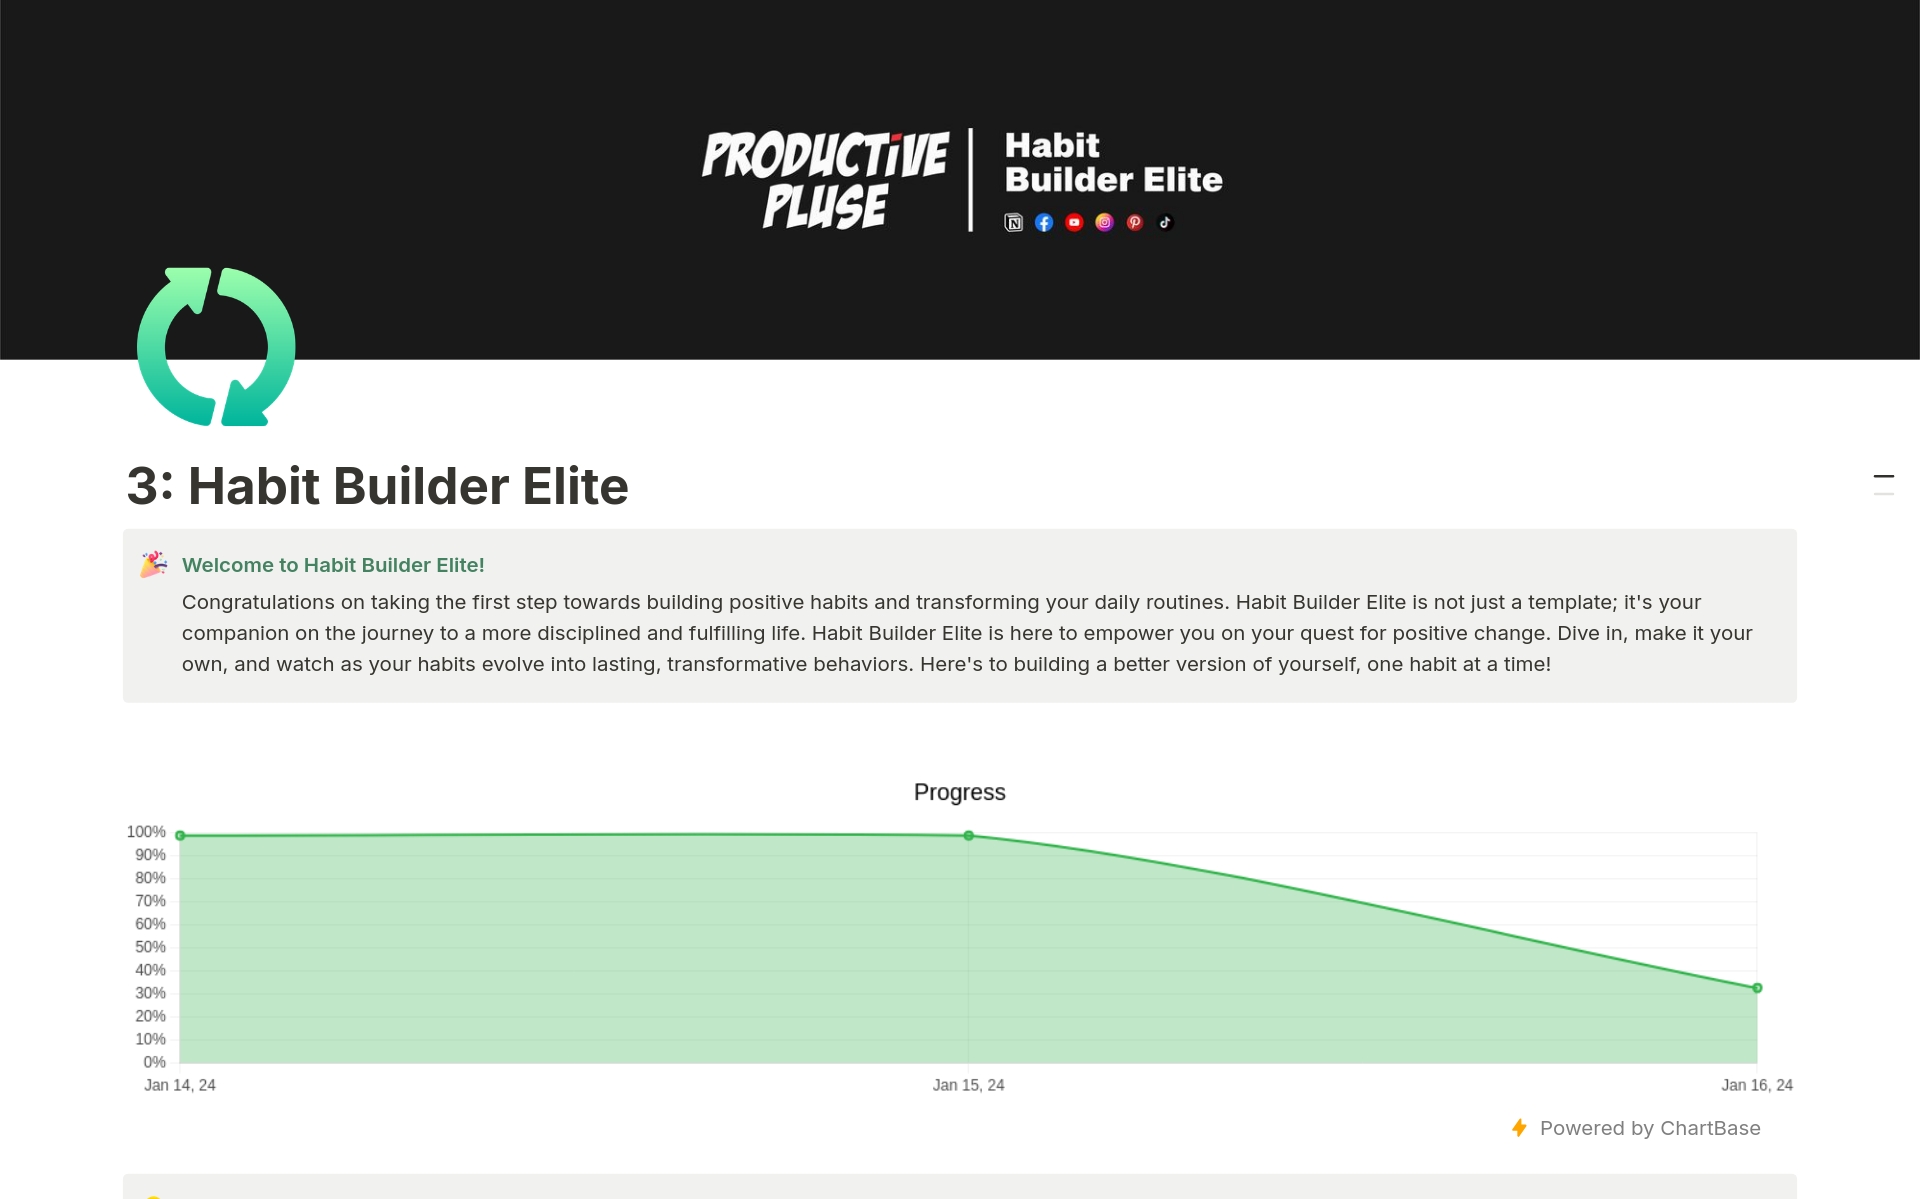 Habit Builder Elite template focuses on helping users establish and track habits, offering tools and insights to build positive routines.